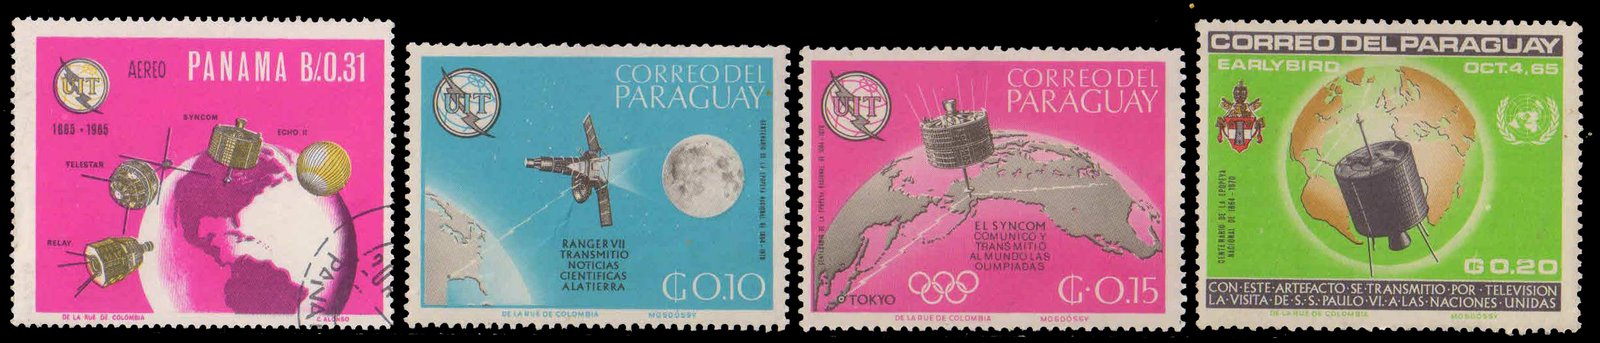 PARAGUAY 1965 - Telecommunication, I.T.U, Set of 4, Mint and Used Stamps